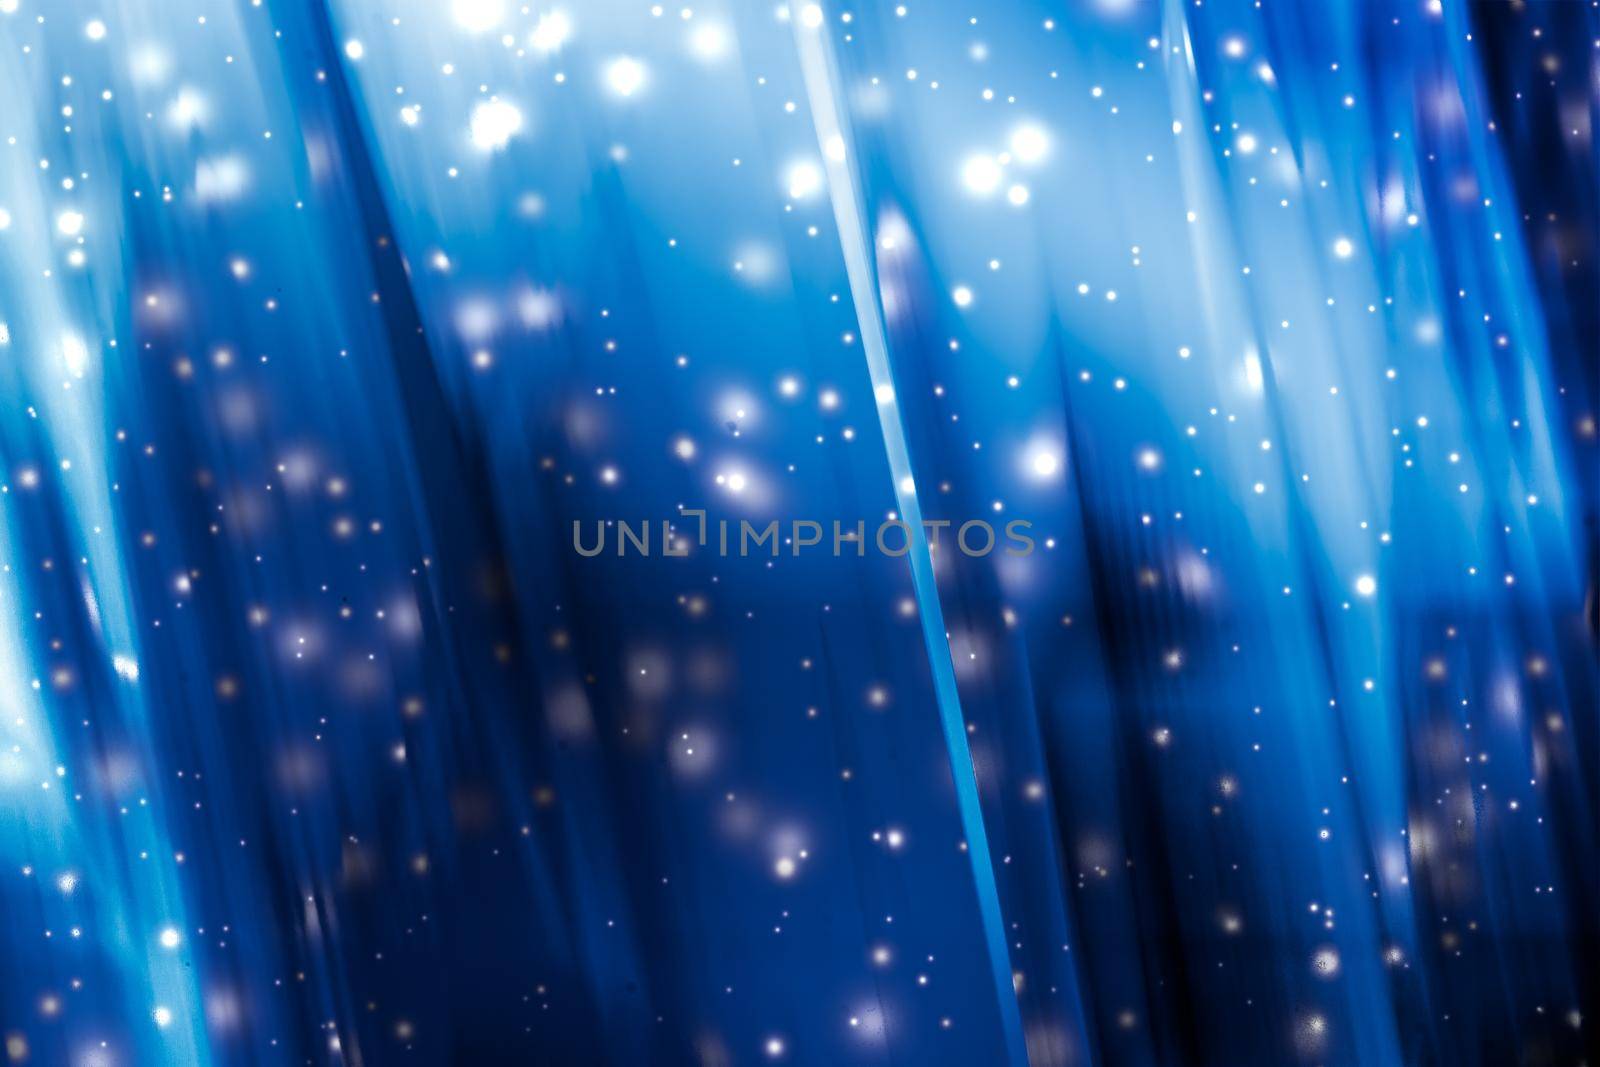 Christmas card, New Years Eve and winter beauty art concept - Holiday brand abstract background, blue digital design with glowing snow